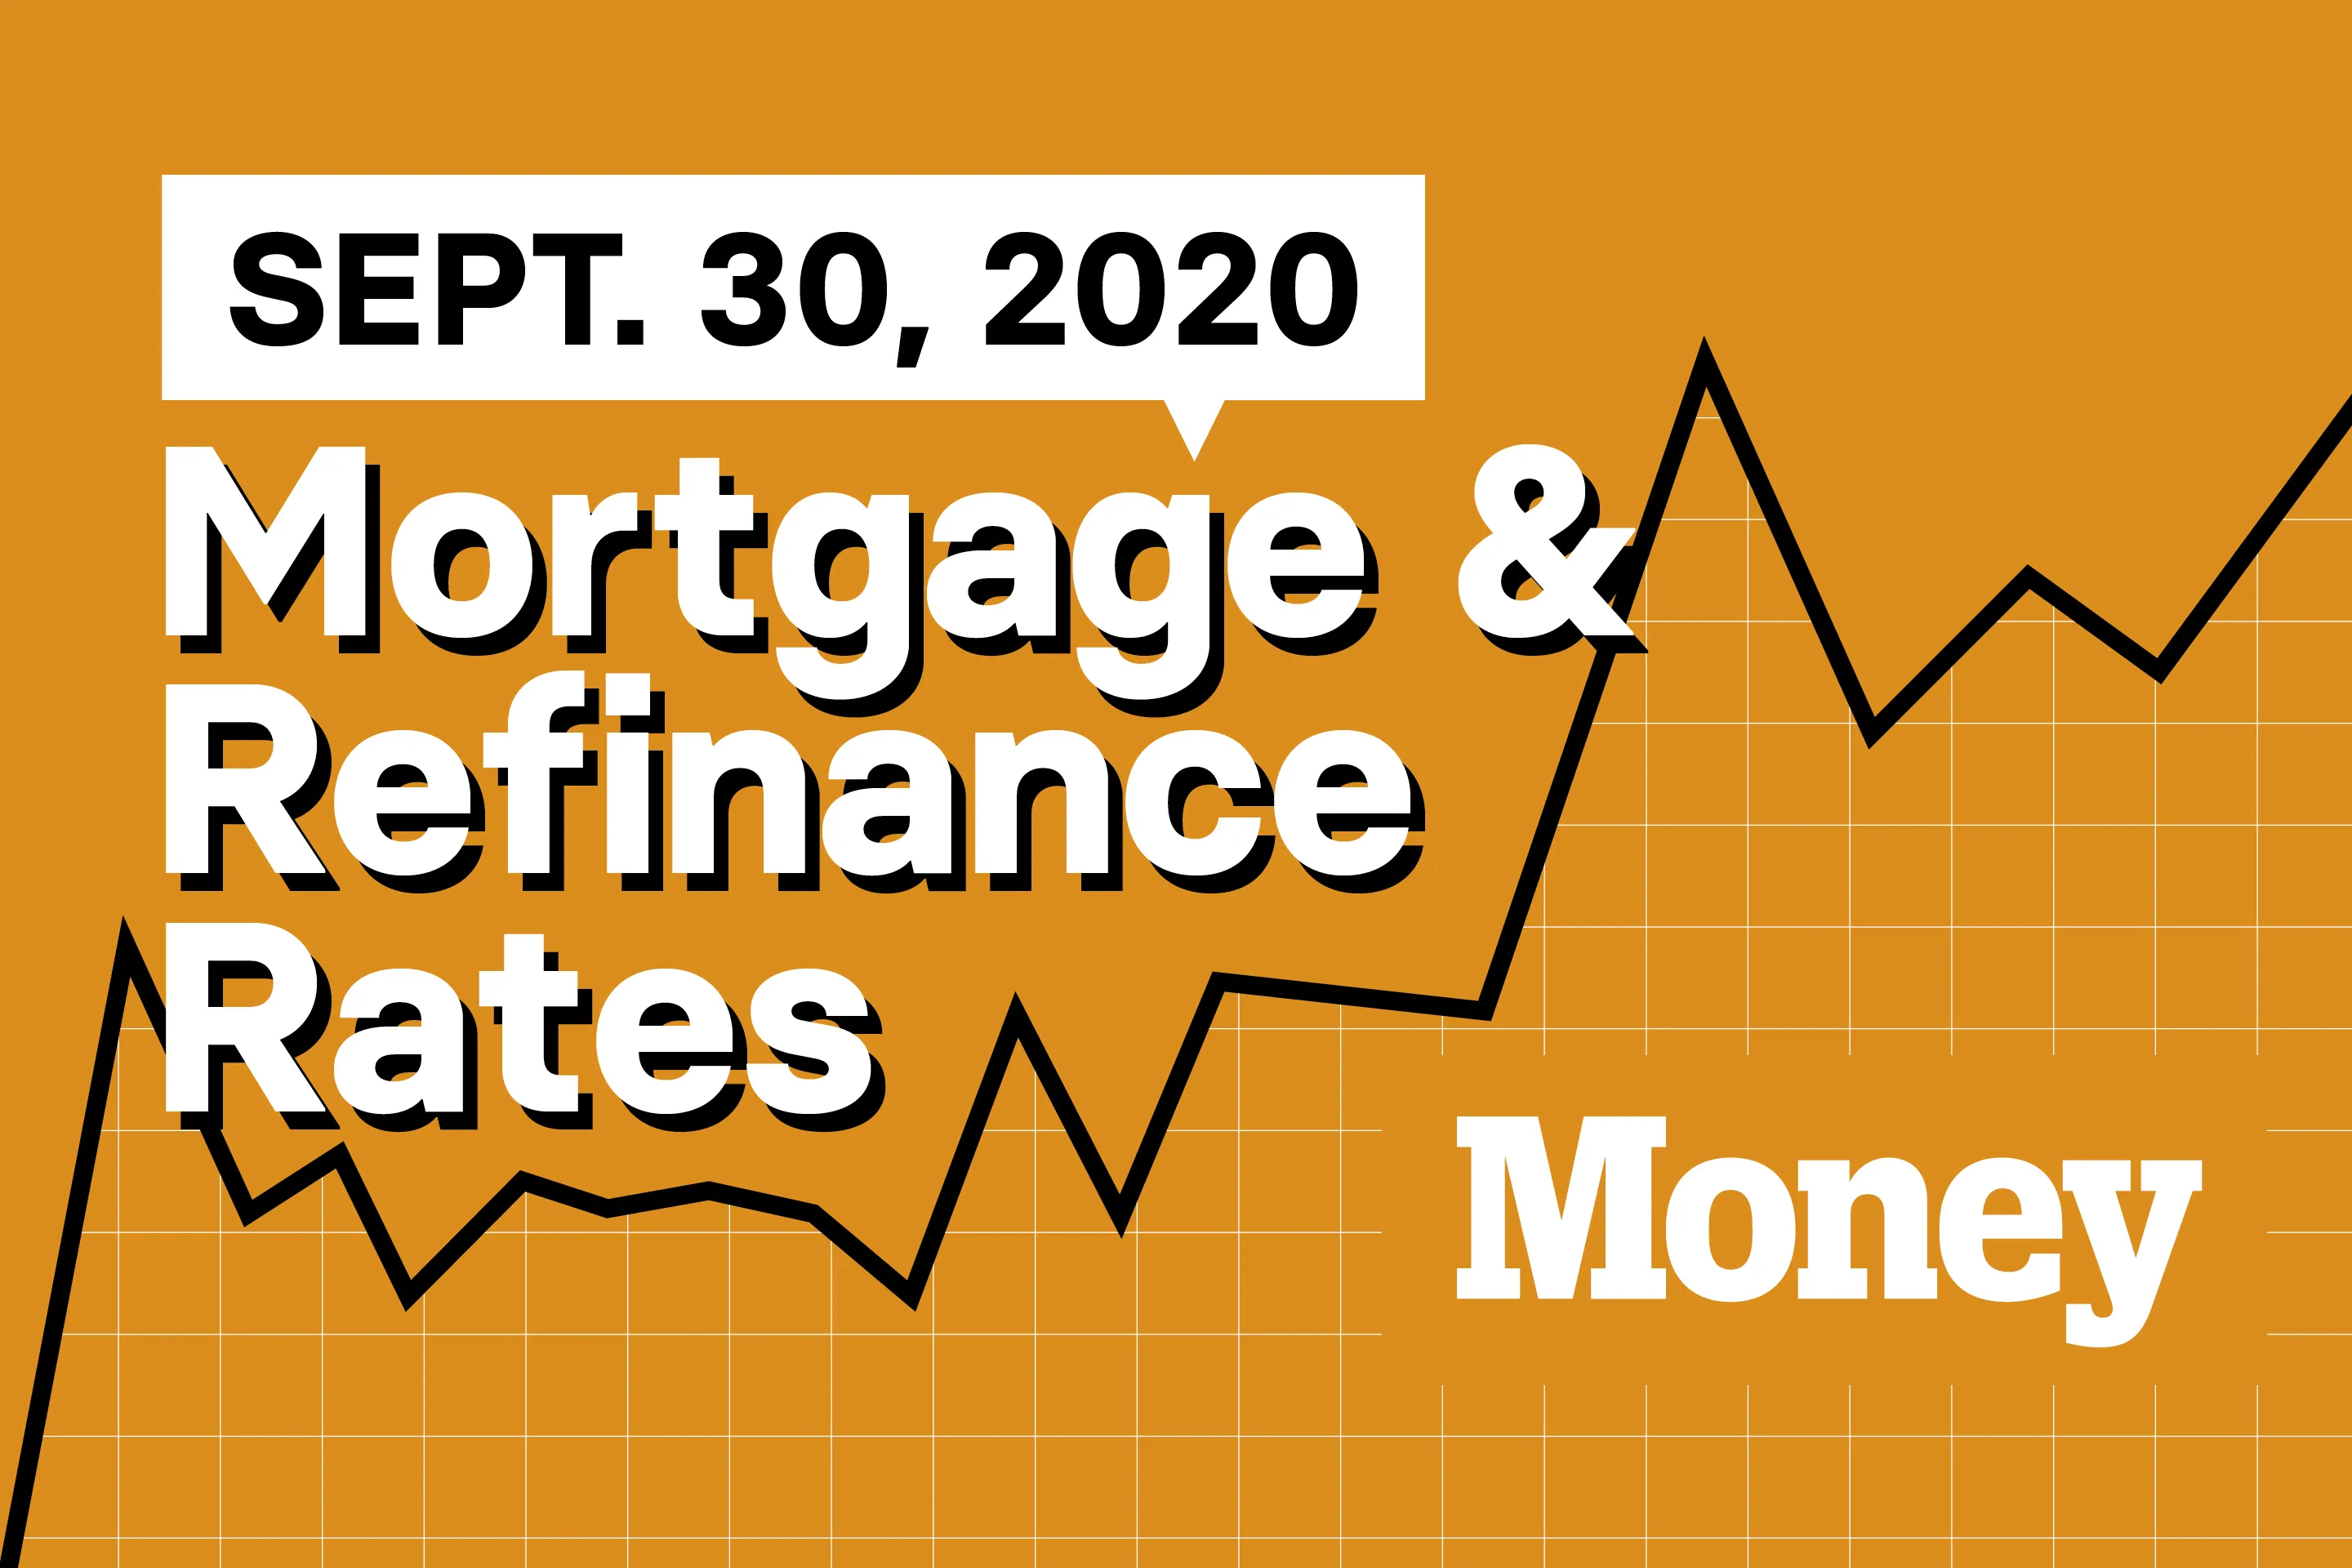 Here Are Today's Best Mortgage & Refinance Rates for September 30, 2020